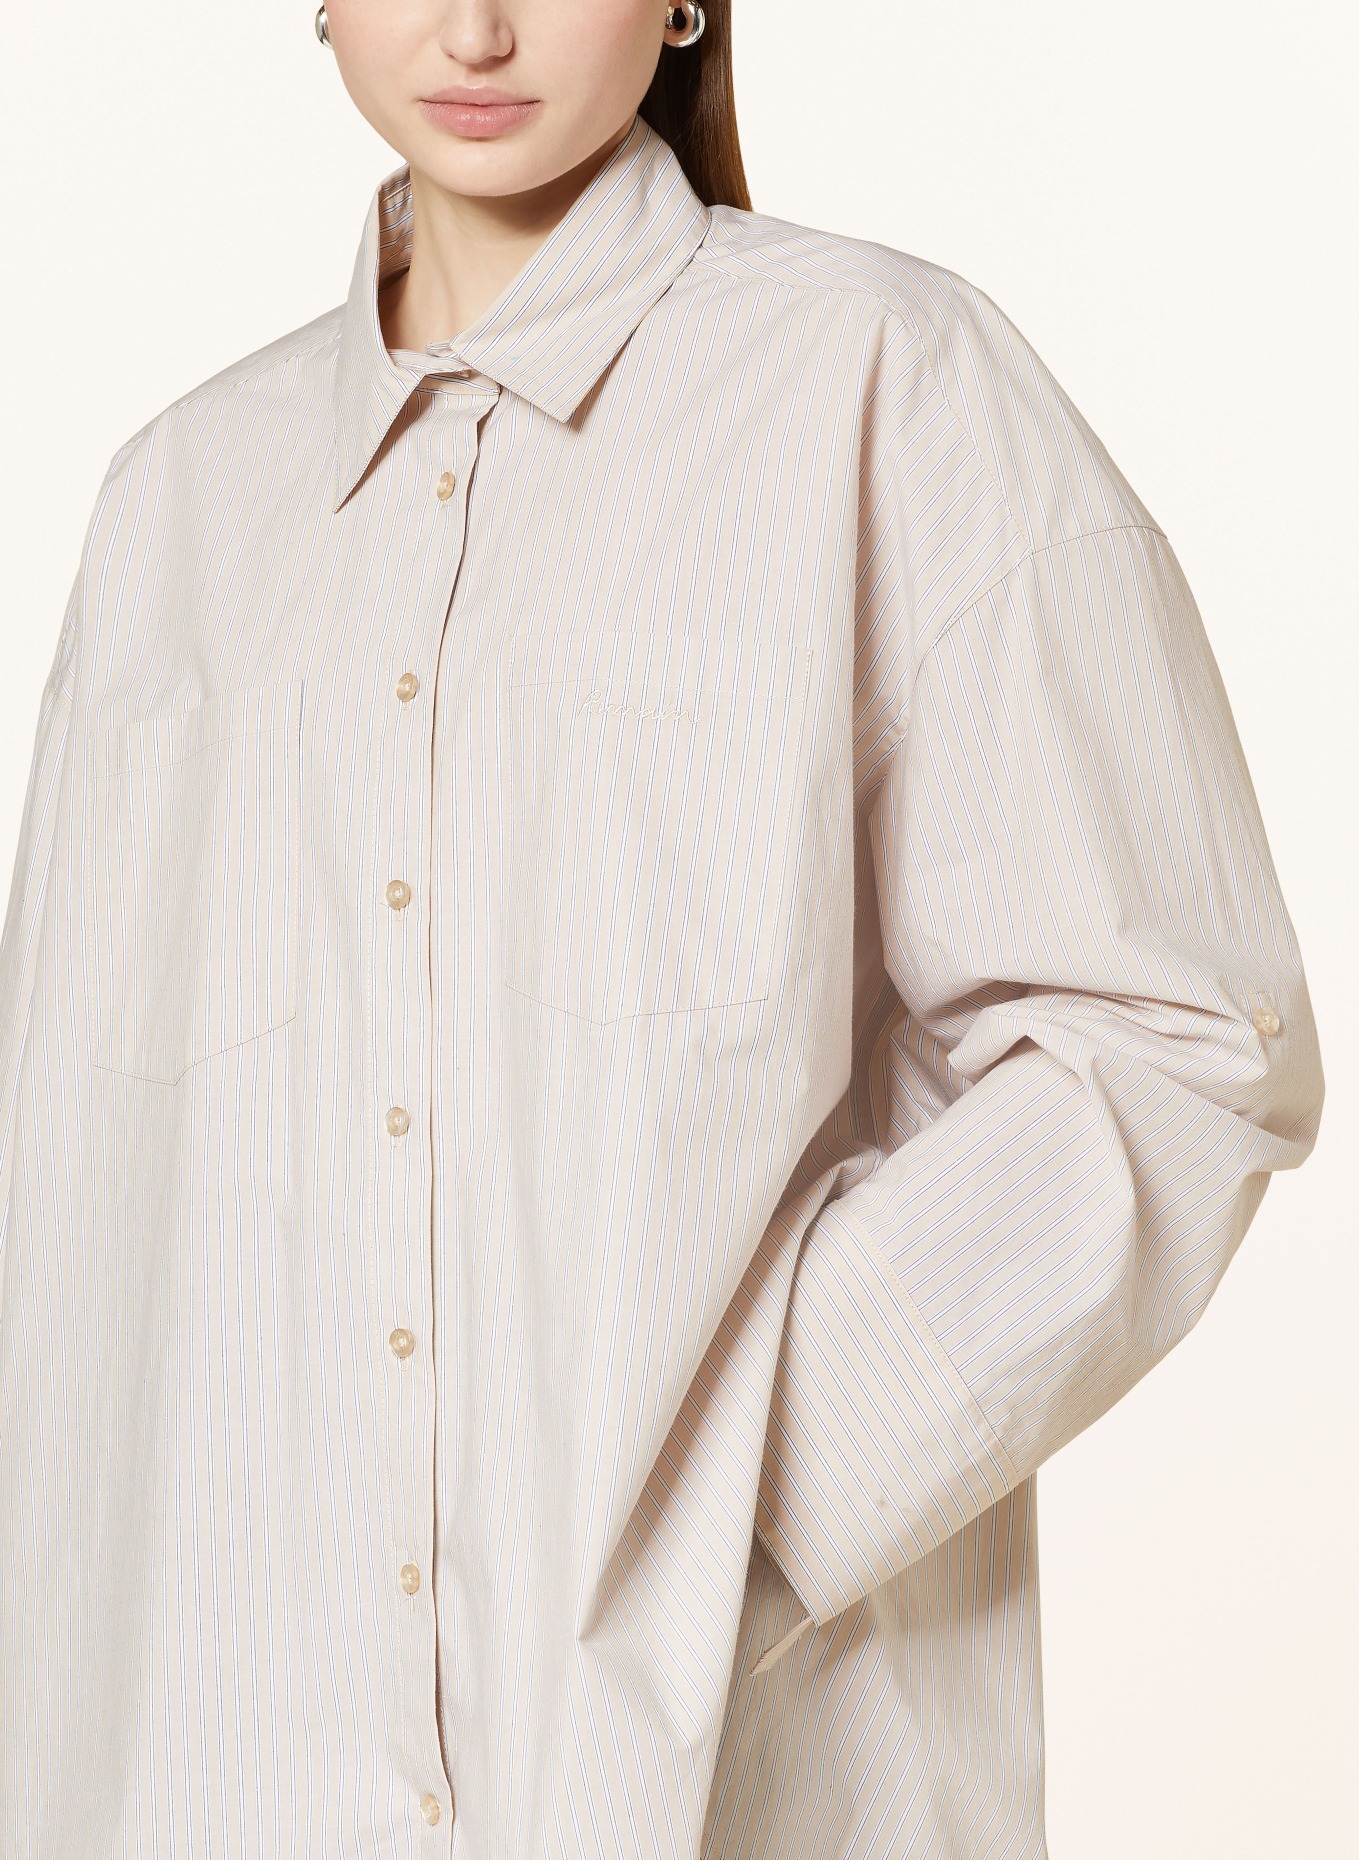 REMAIN Shirt blouse, Color: LIGHT BROWN/ WHITE/ GRAY (Image 4)